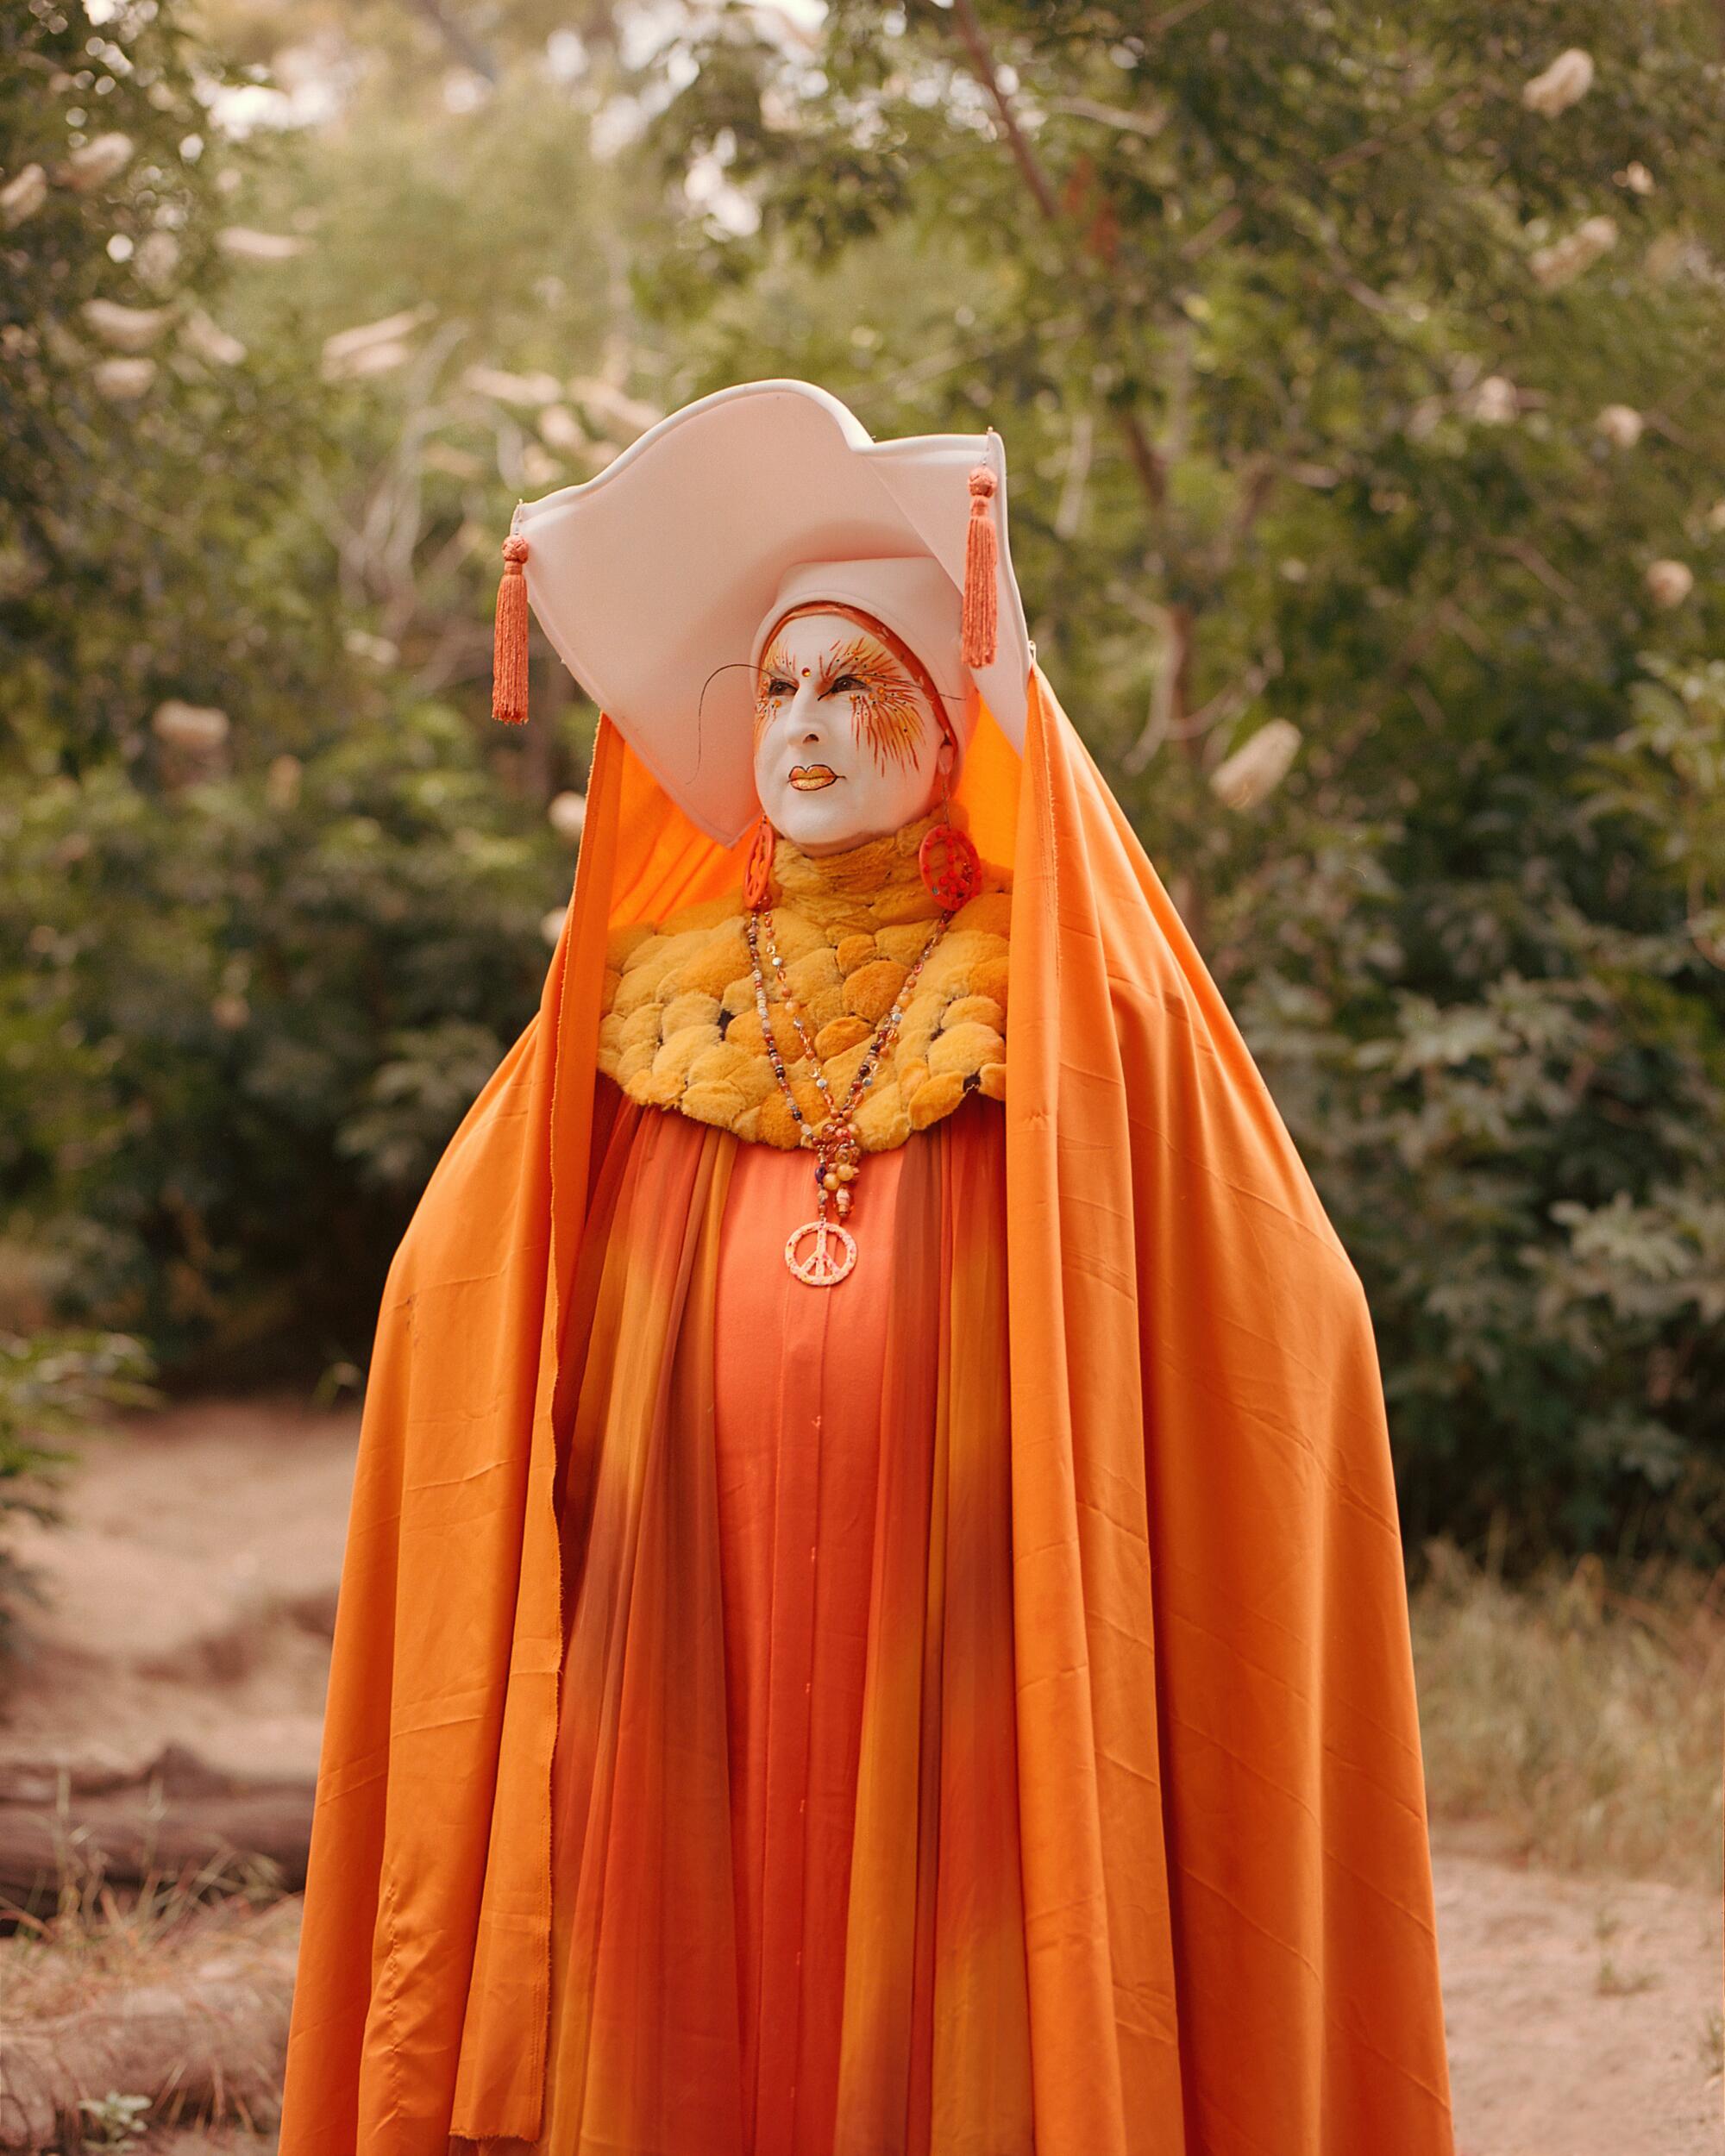 A drag nun in white face paint, wimpole and elaborate orange dress and cape.